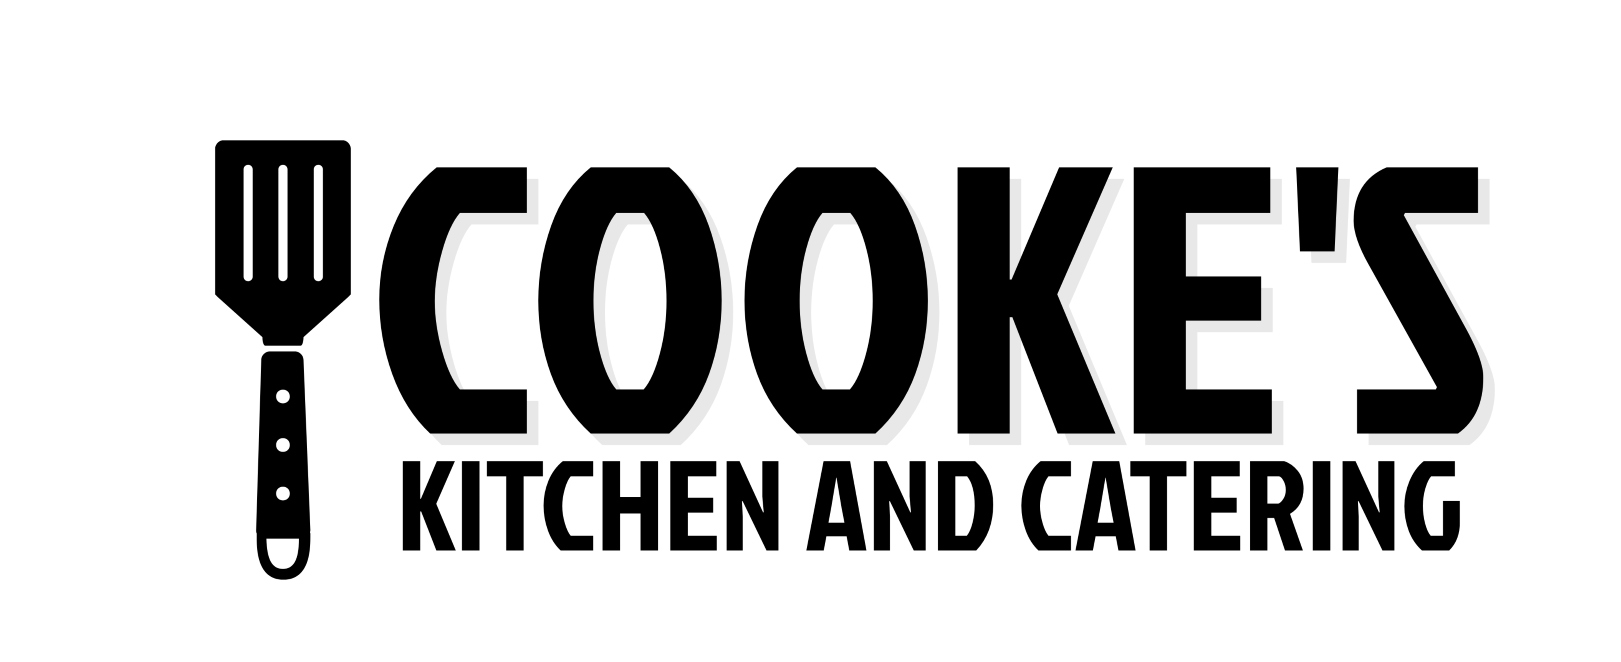 Cooke's Kitchen and Catering